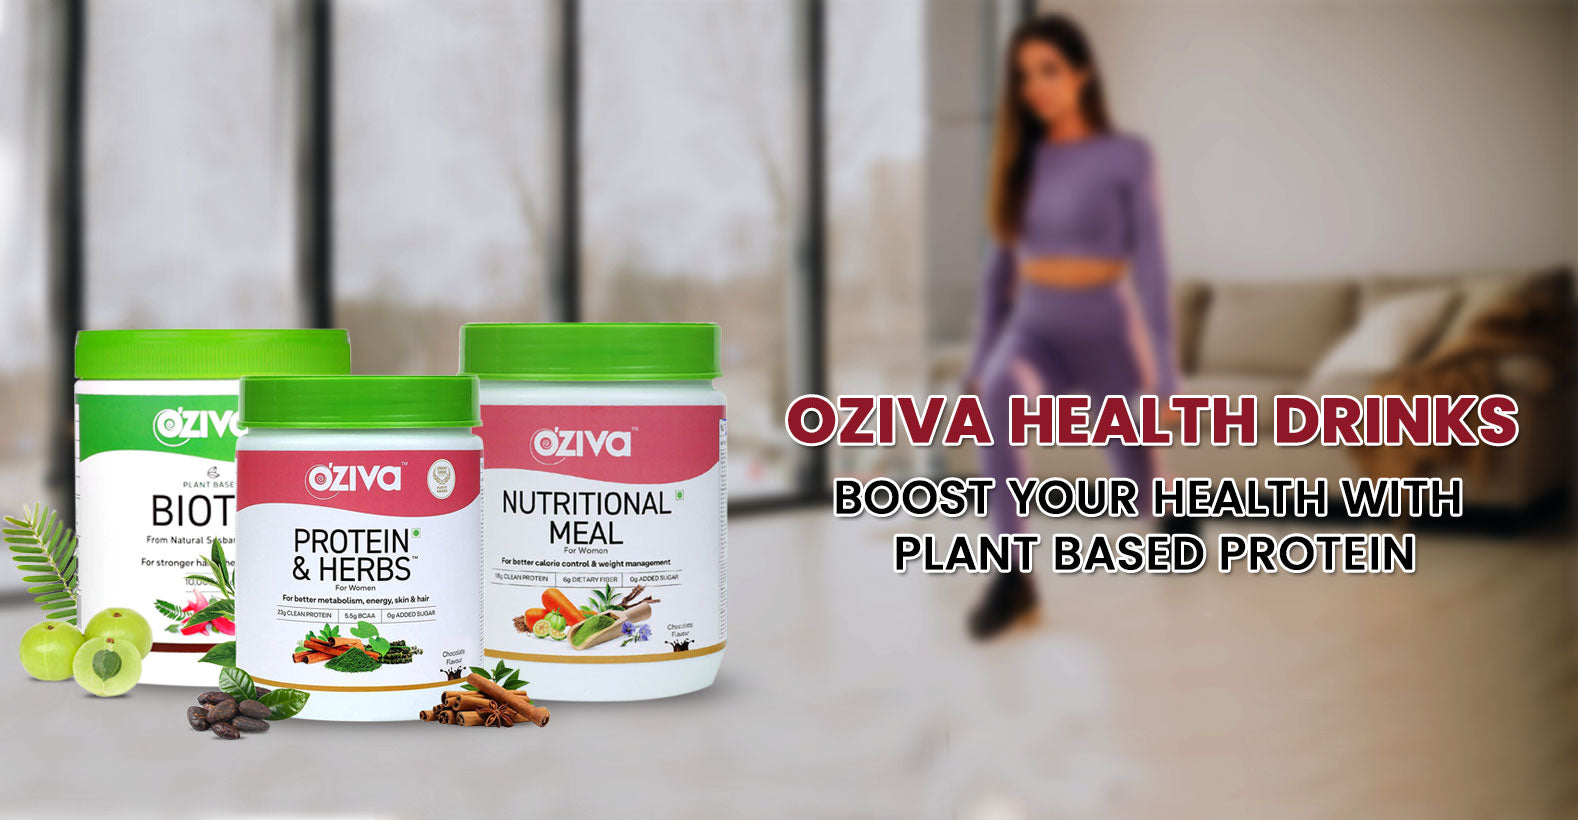 Oziva Health Drink- Choice for Natural, Clean & Plant Based Nutrition